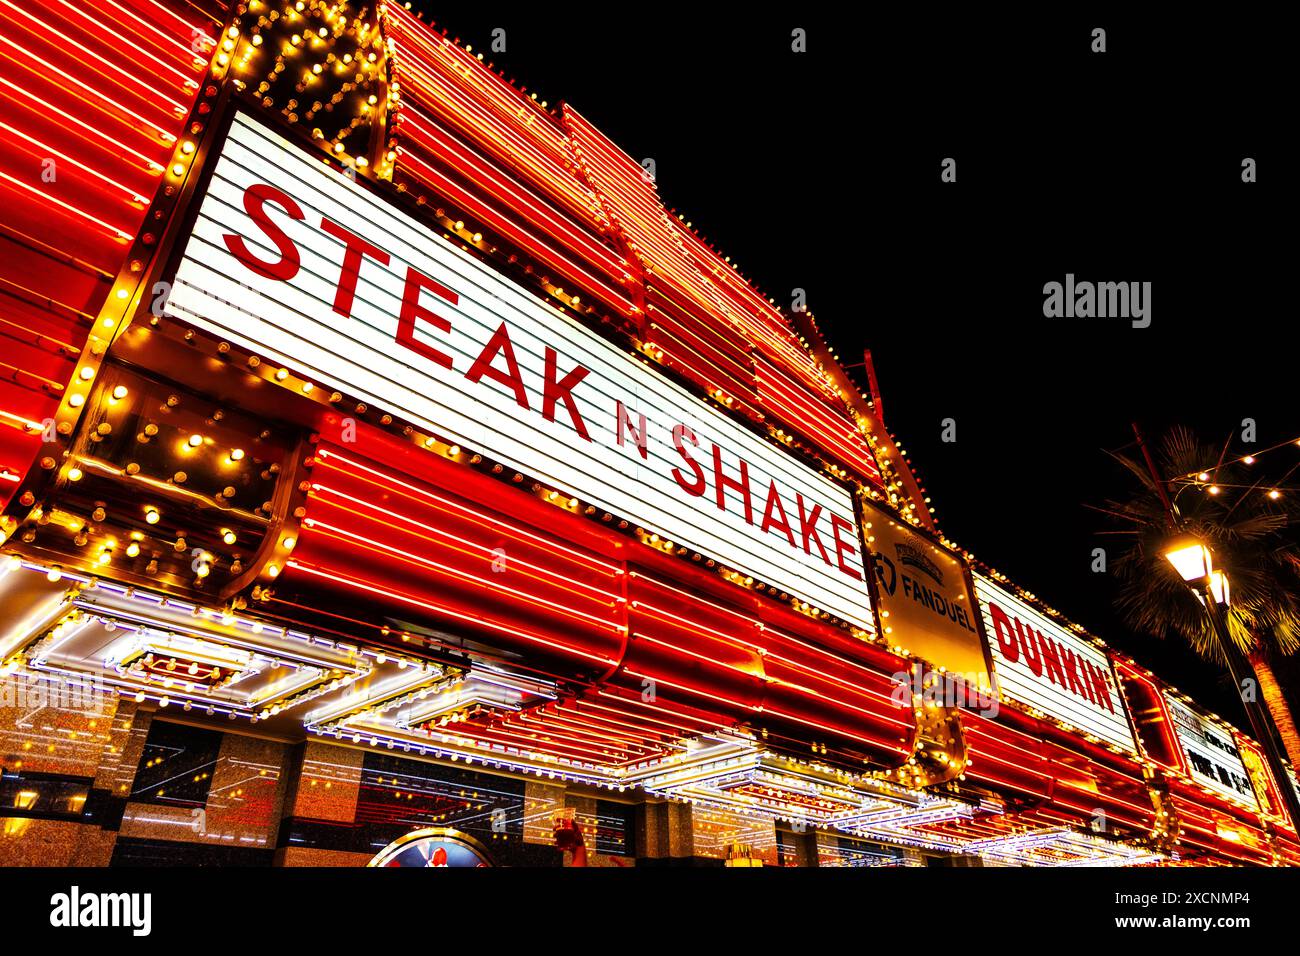 Neon signs on the facade of Fremont Hotel & Casino at the Fremont Street Experience, Las Vegas, Nevada, USA Stock Photo